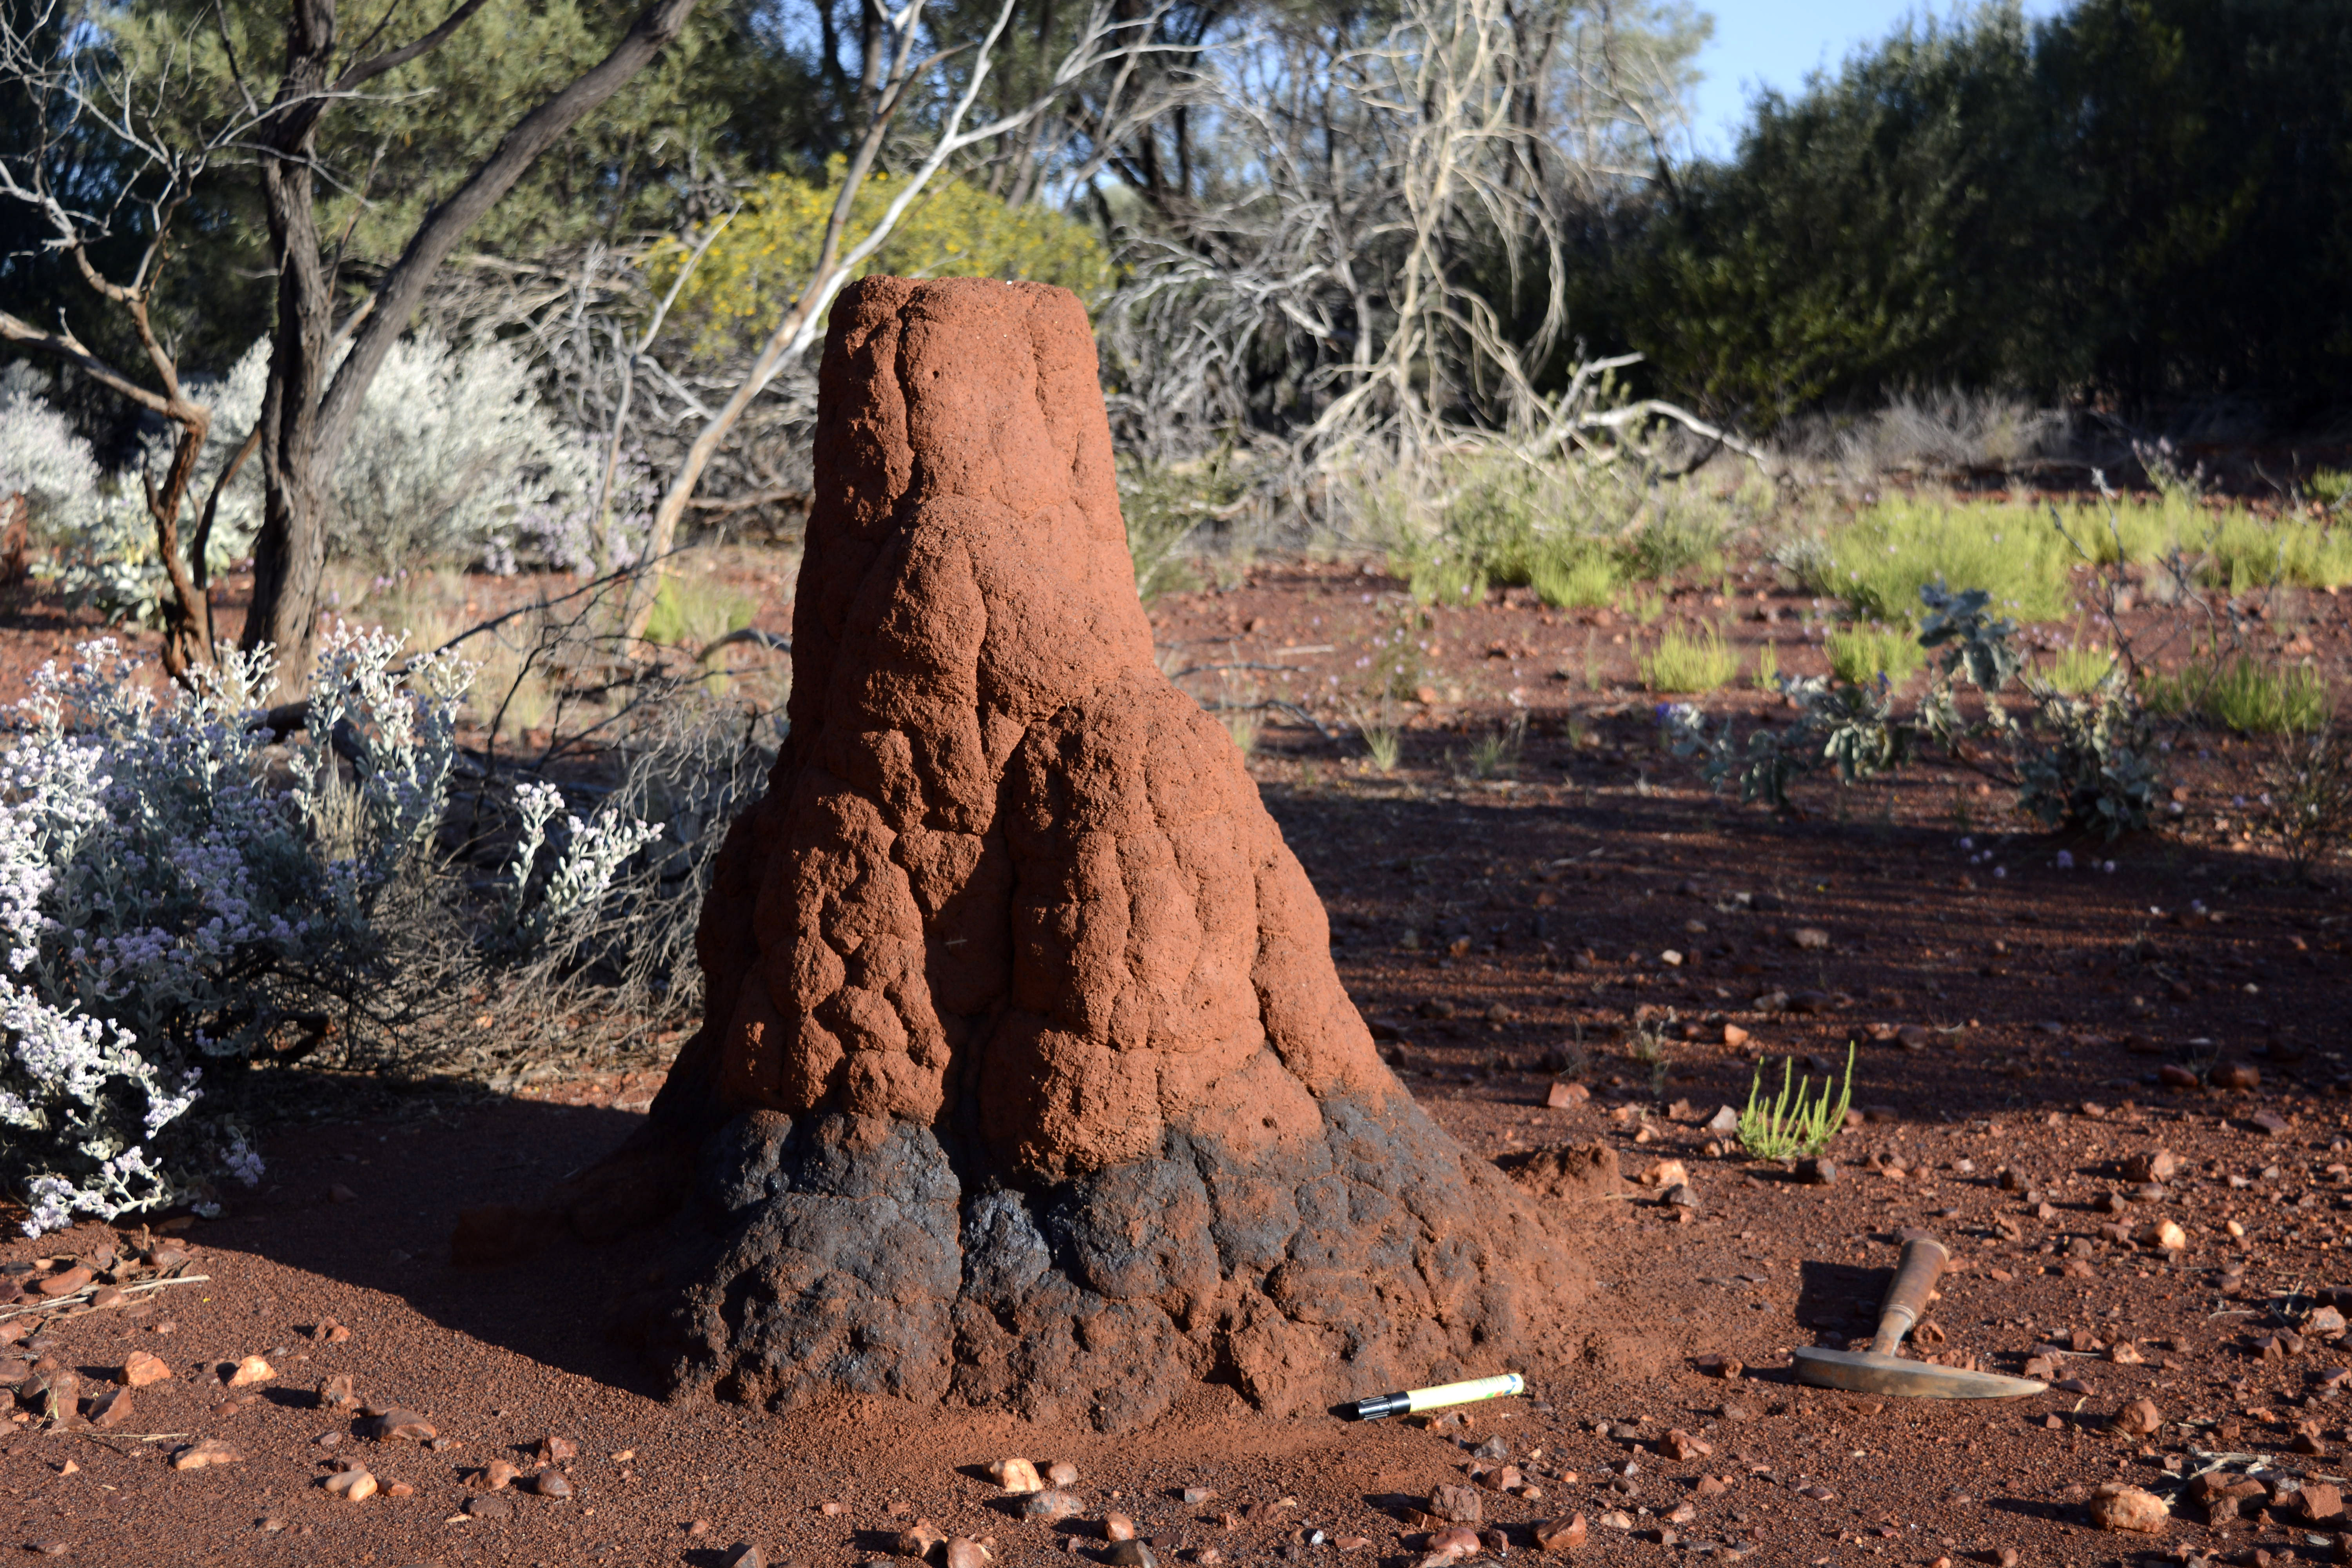 ermite mound made from red-coloured earth showing a blue metallic band around the base.